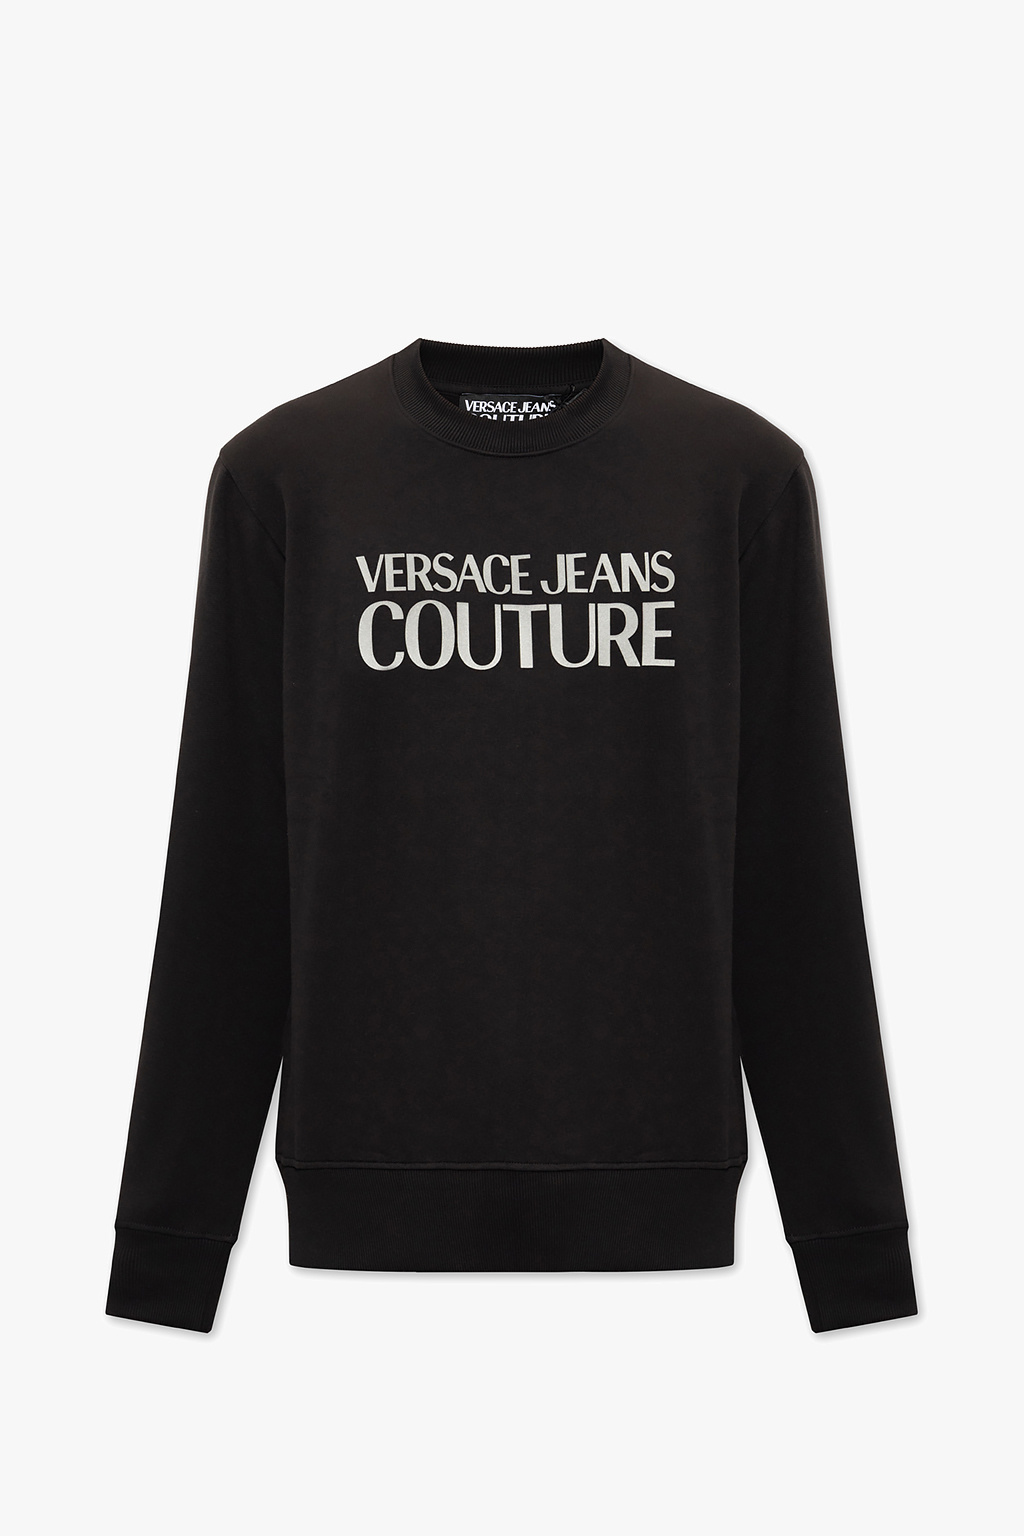 Versace Jeans Couture All Blacks Lifestyle T Shirt Mens